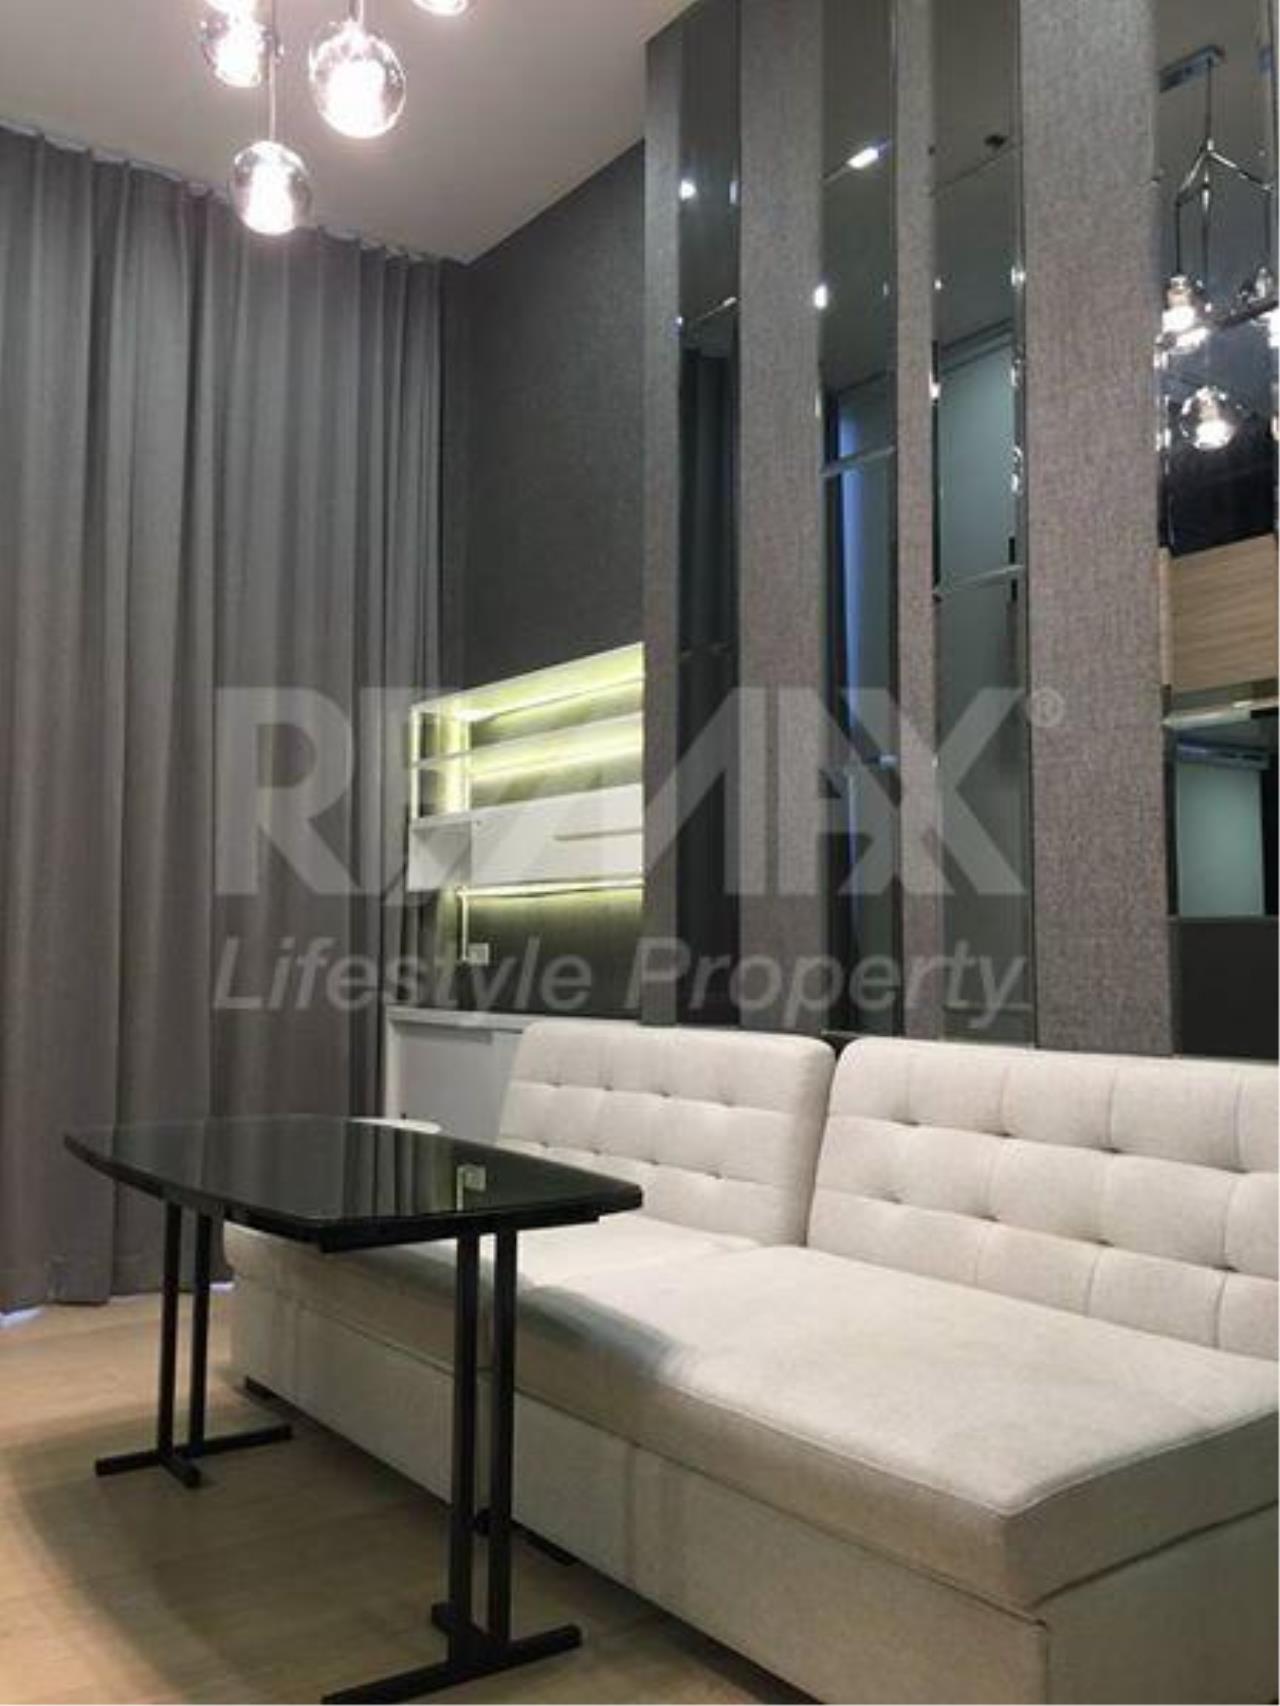 RE/MAX LifeStyle Property Agency's Chewathai Residence Asoke 3